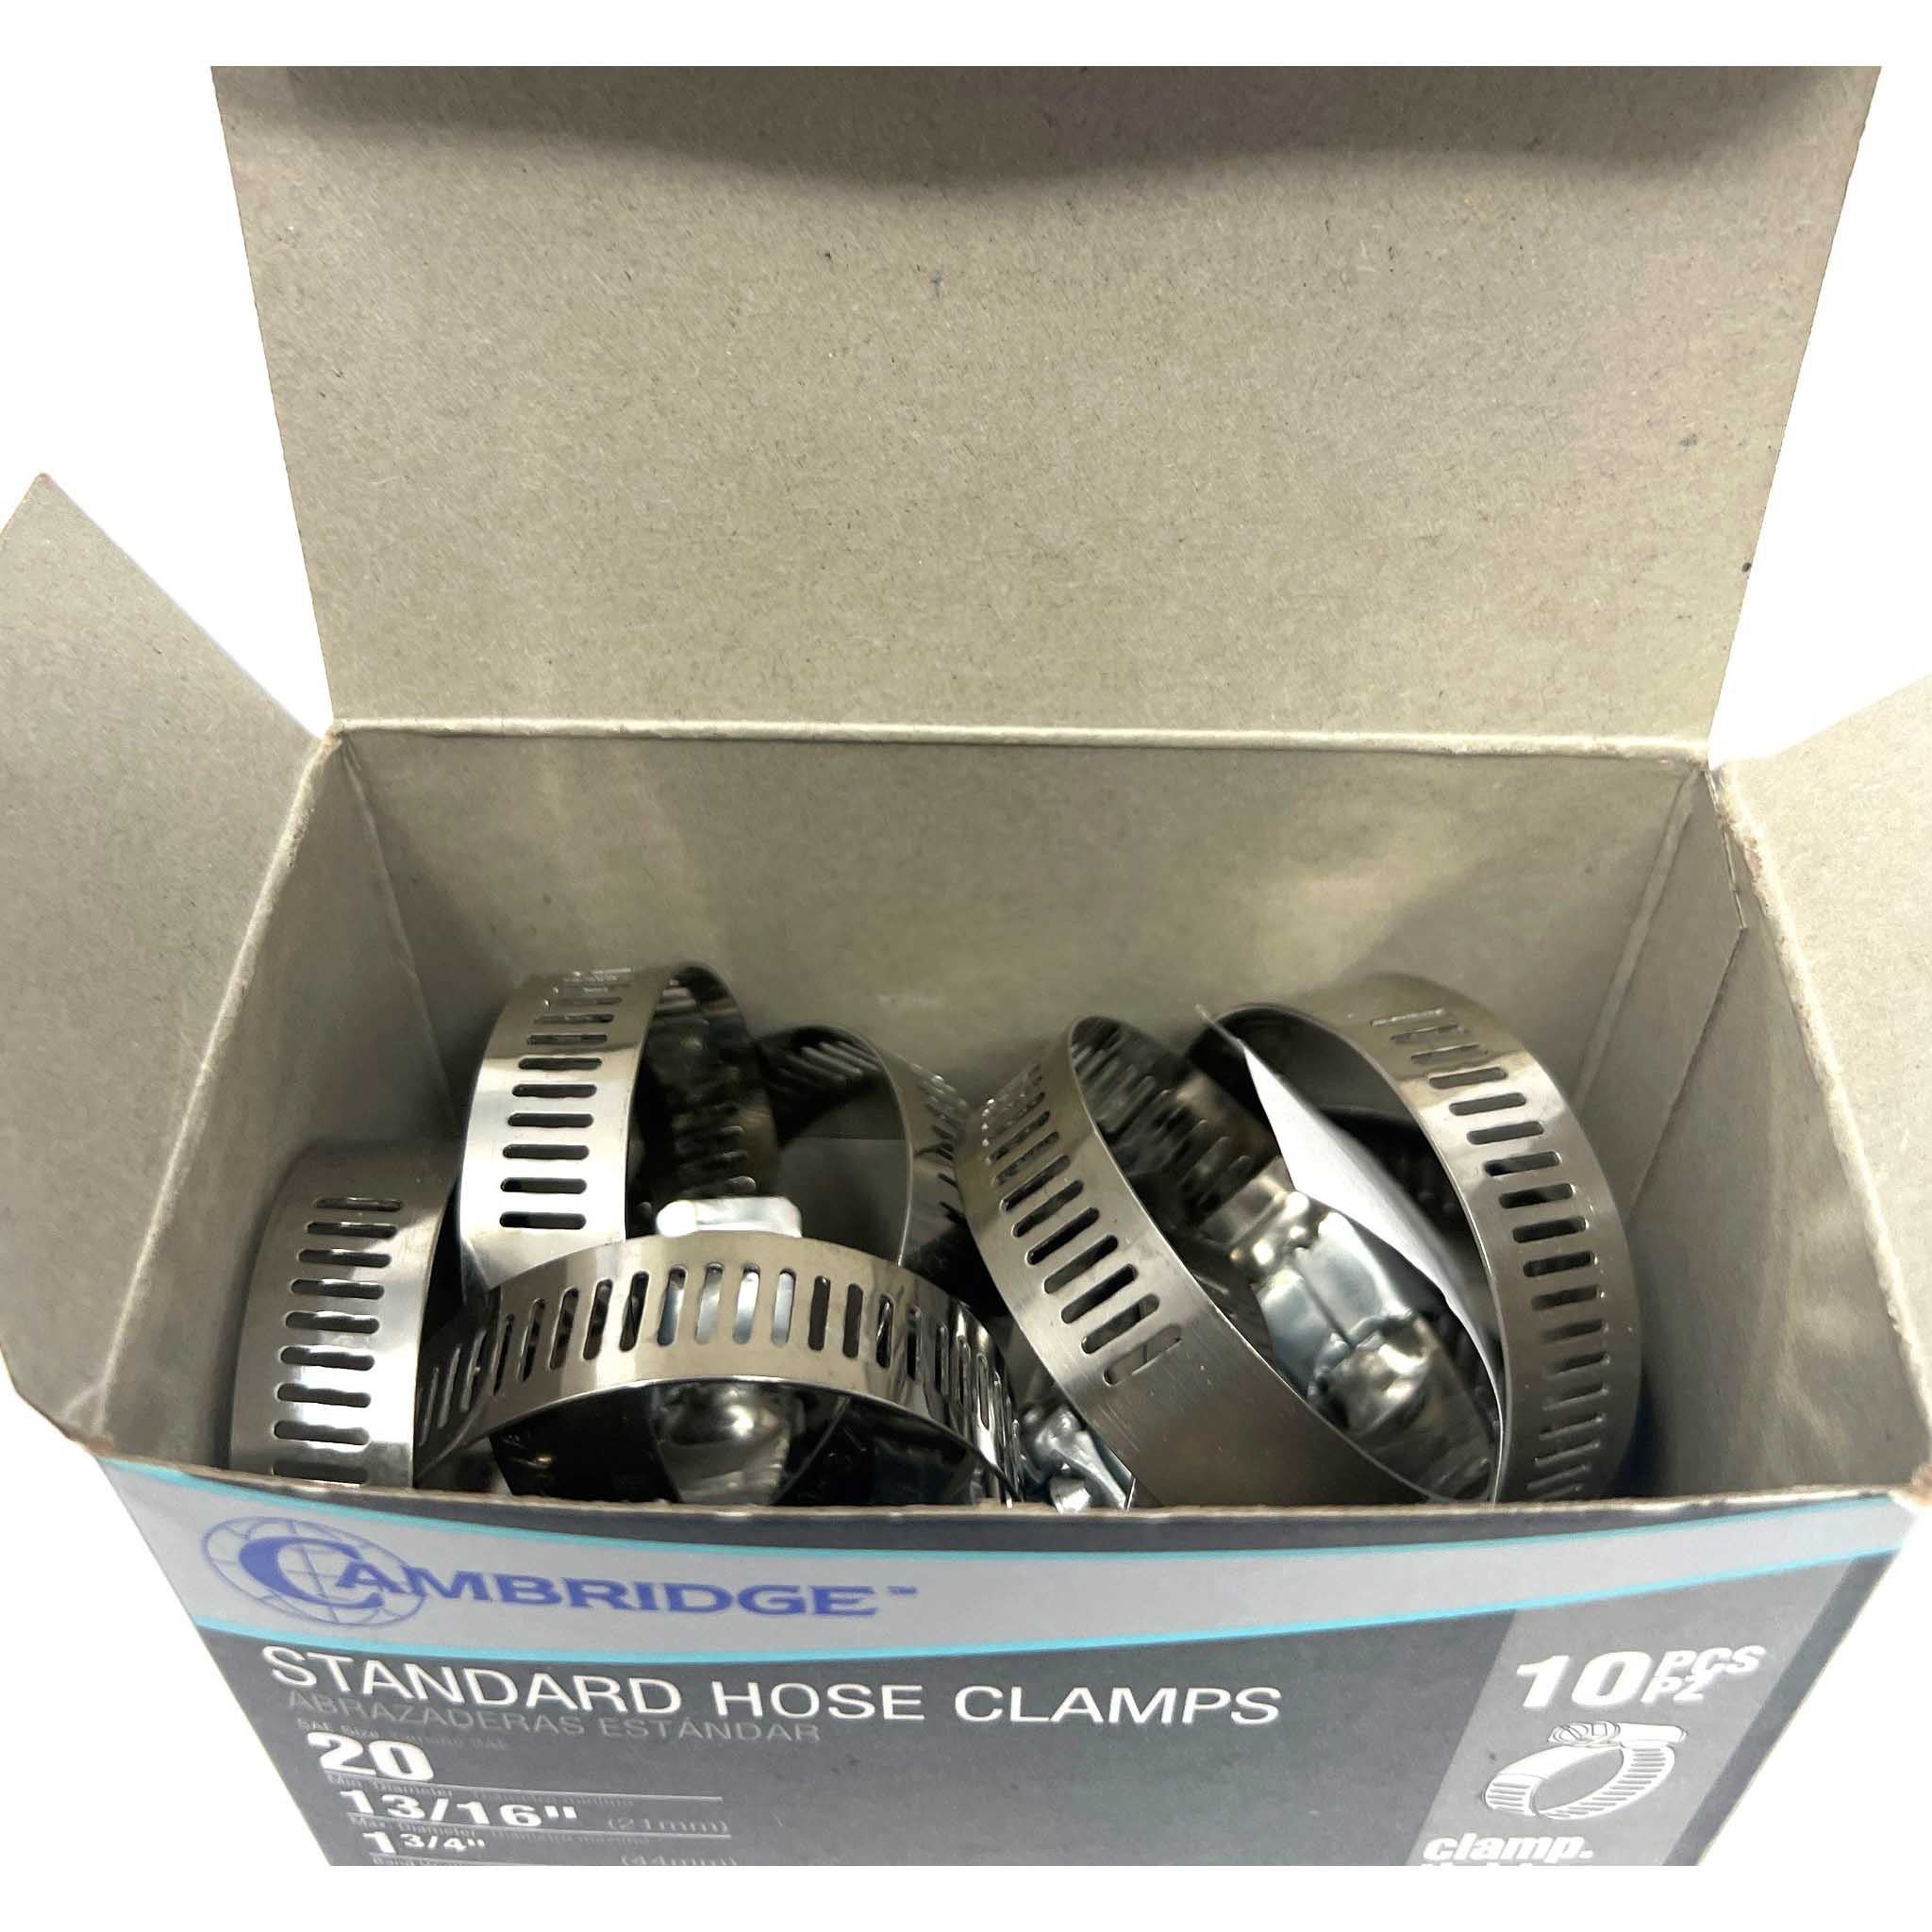 #20 - 13/16 TO 1-3/4 STANDARD HOSE CLAMP (Box of 10)